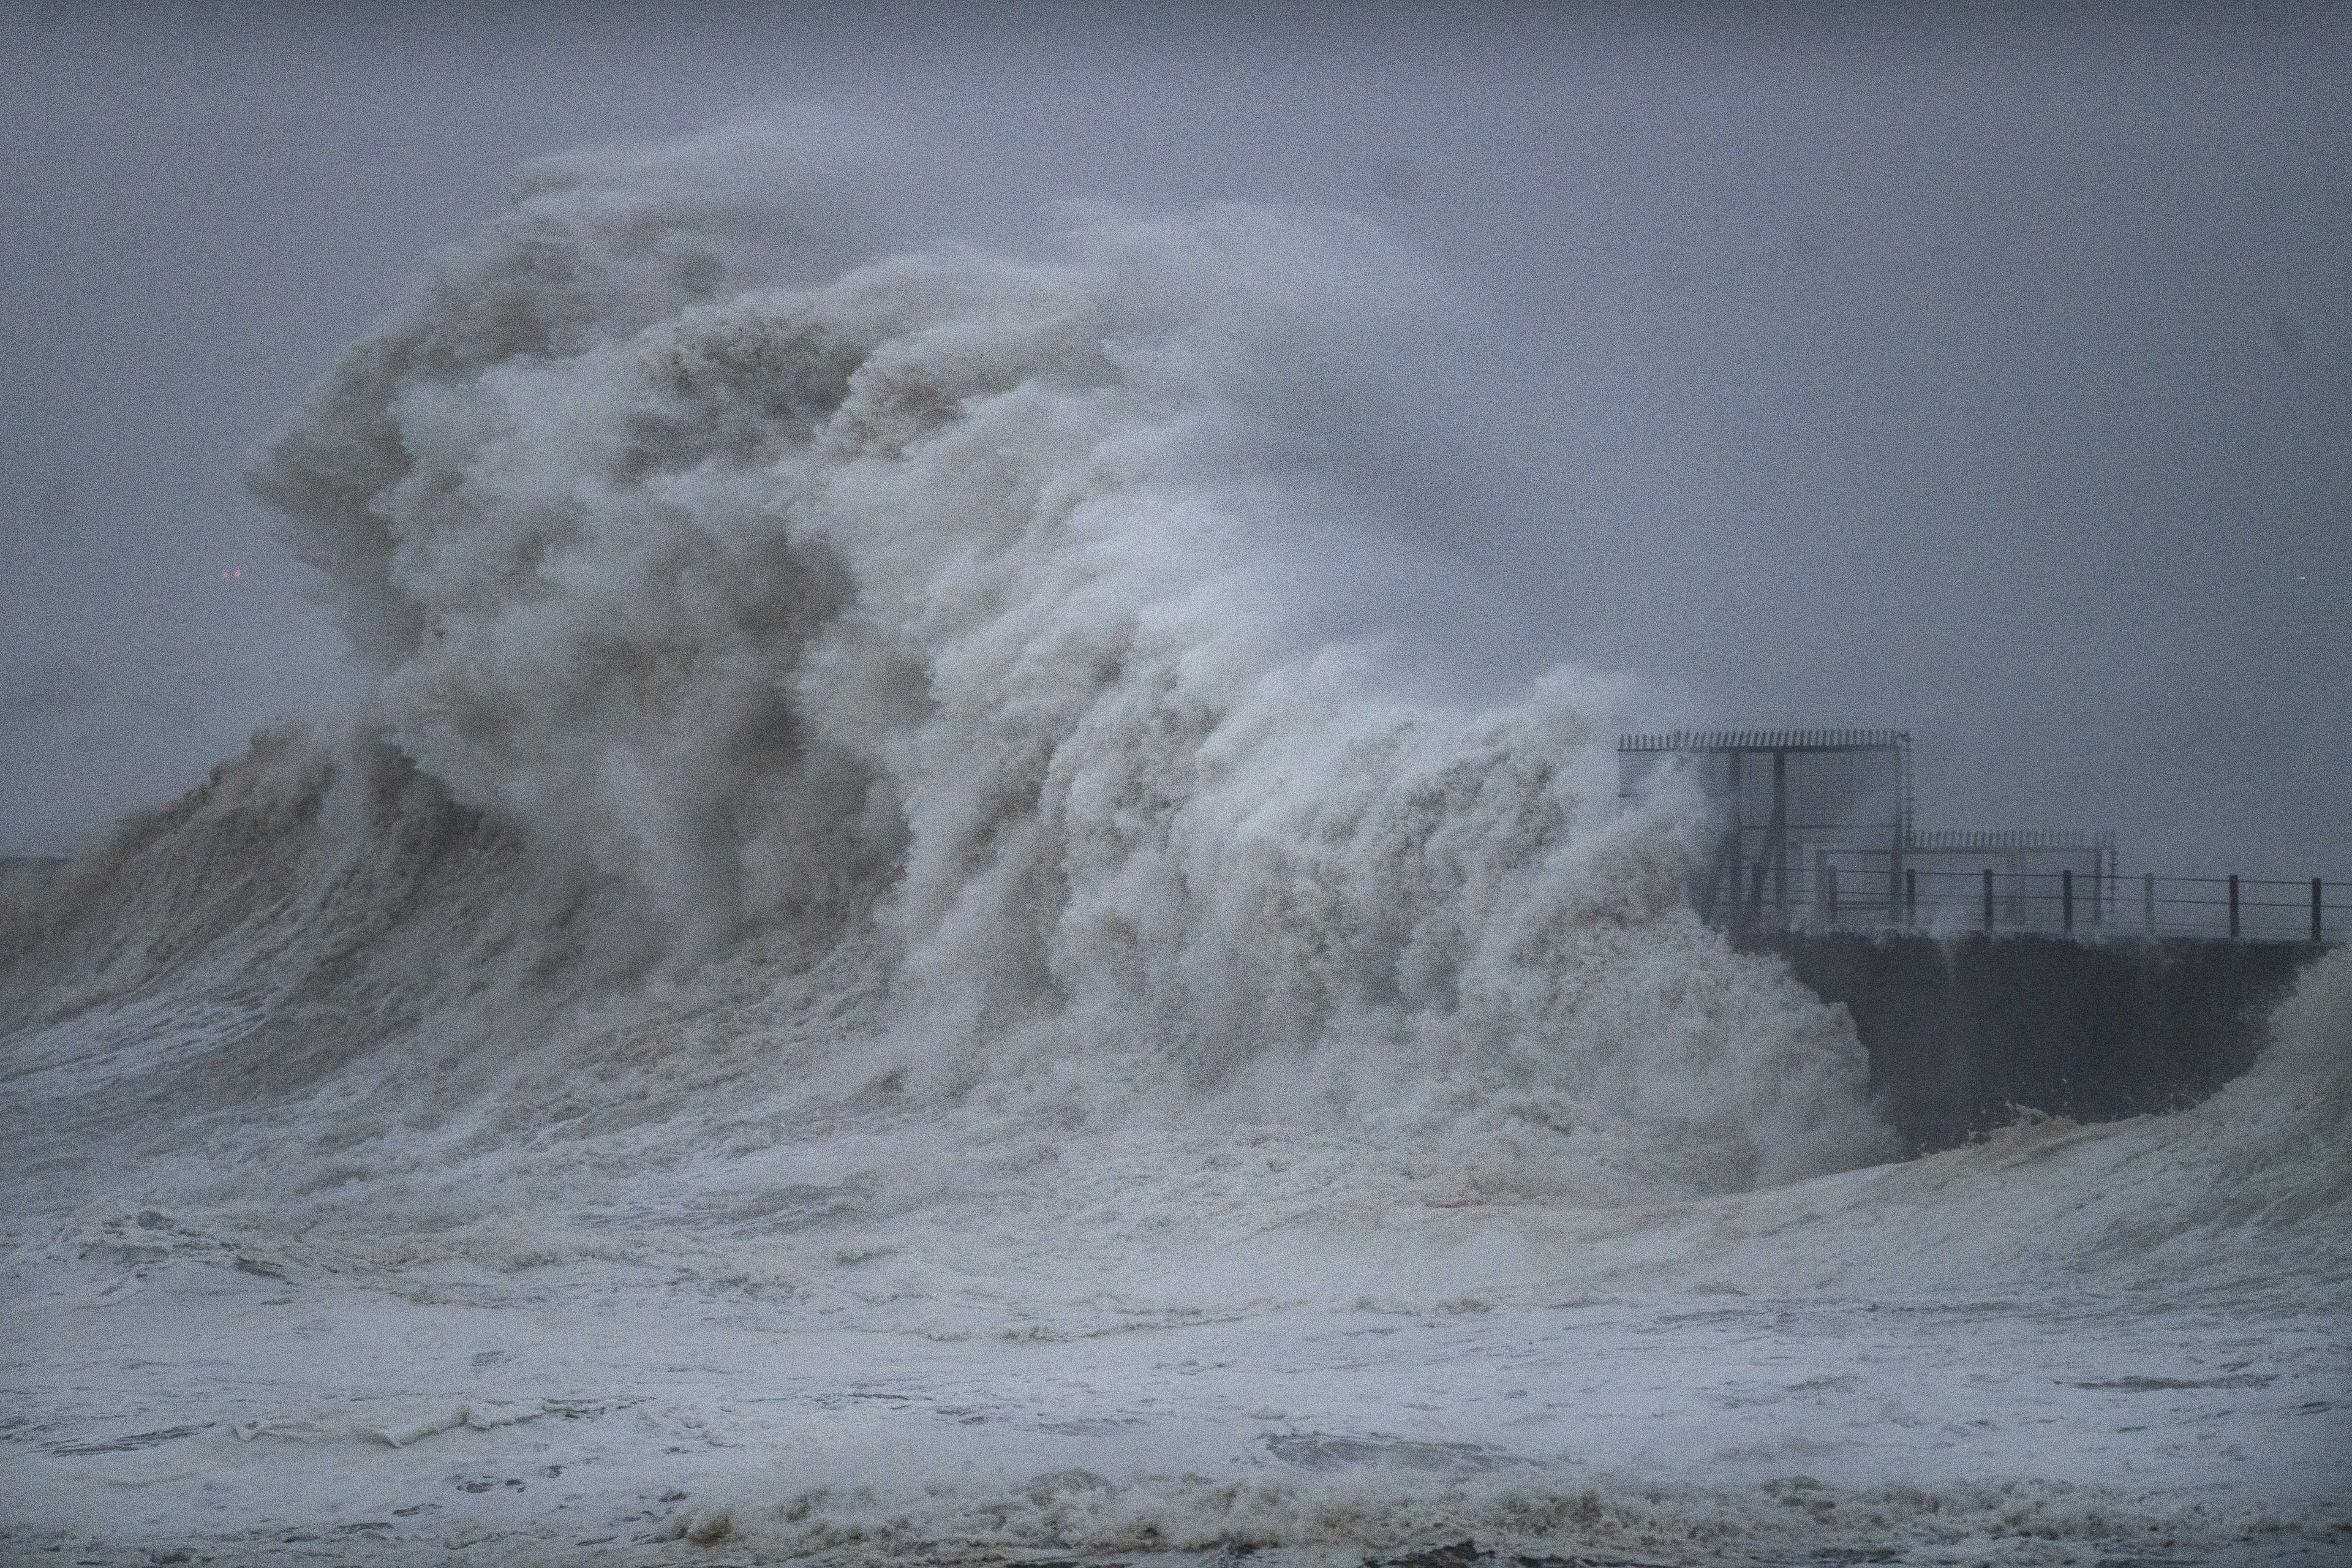 Storm Babet hits the North East Coast of England this morning with waves as big as 20ft